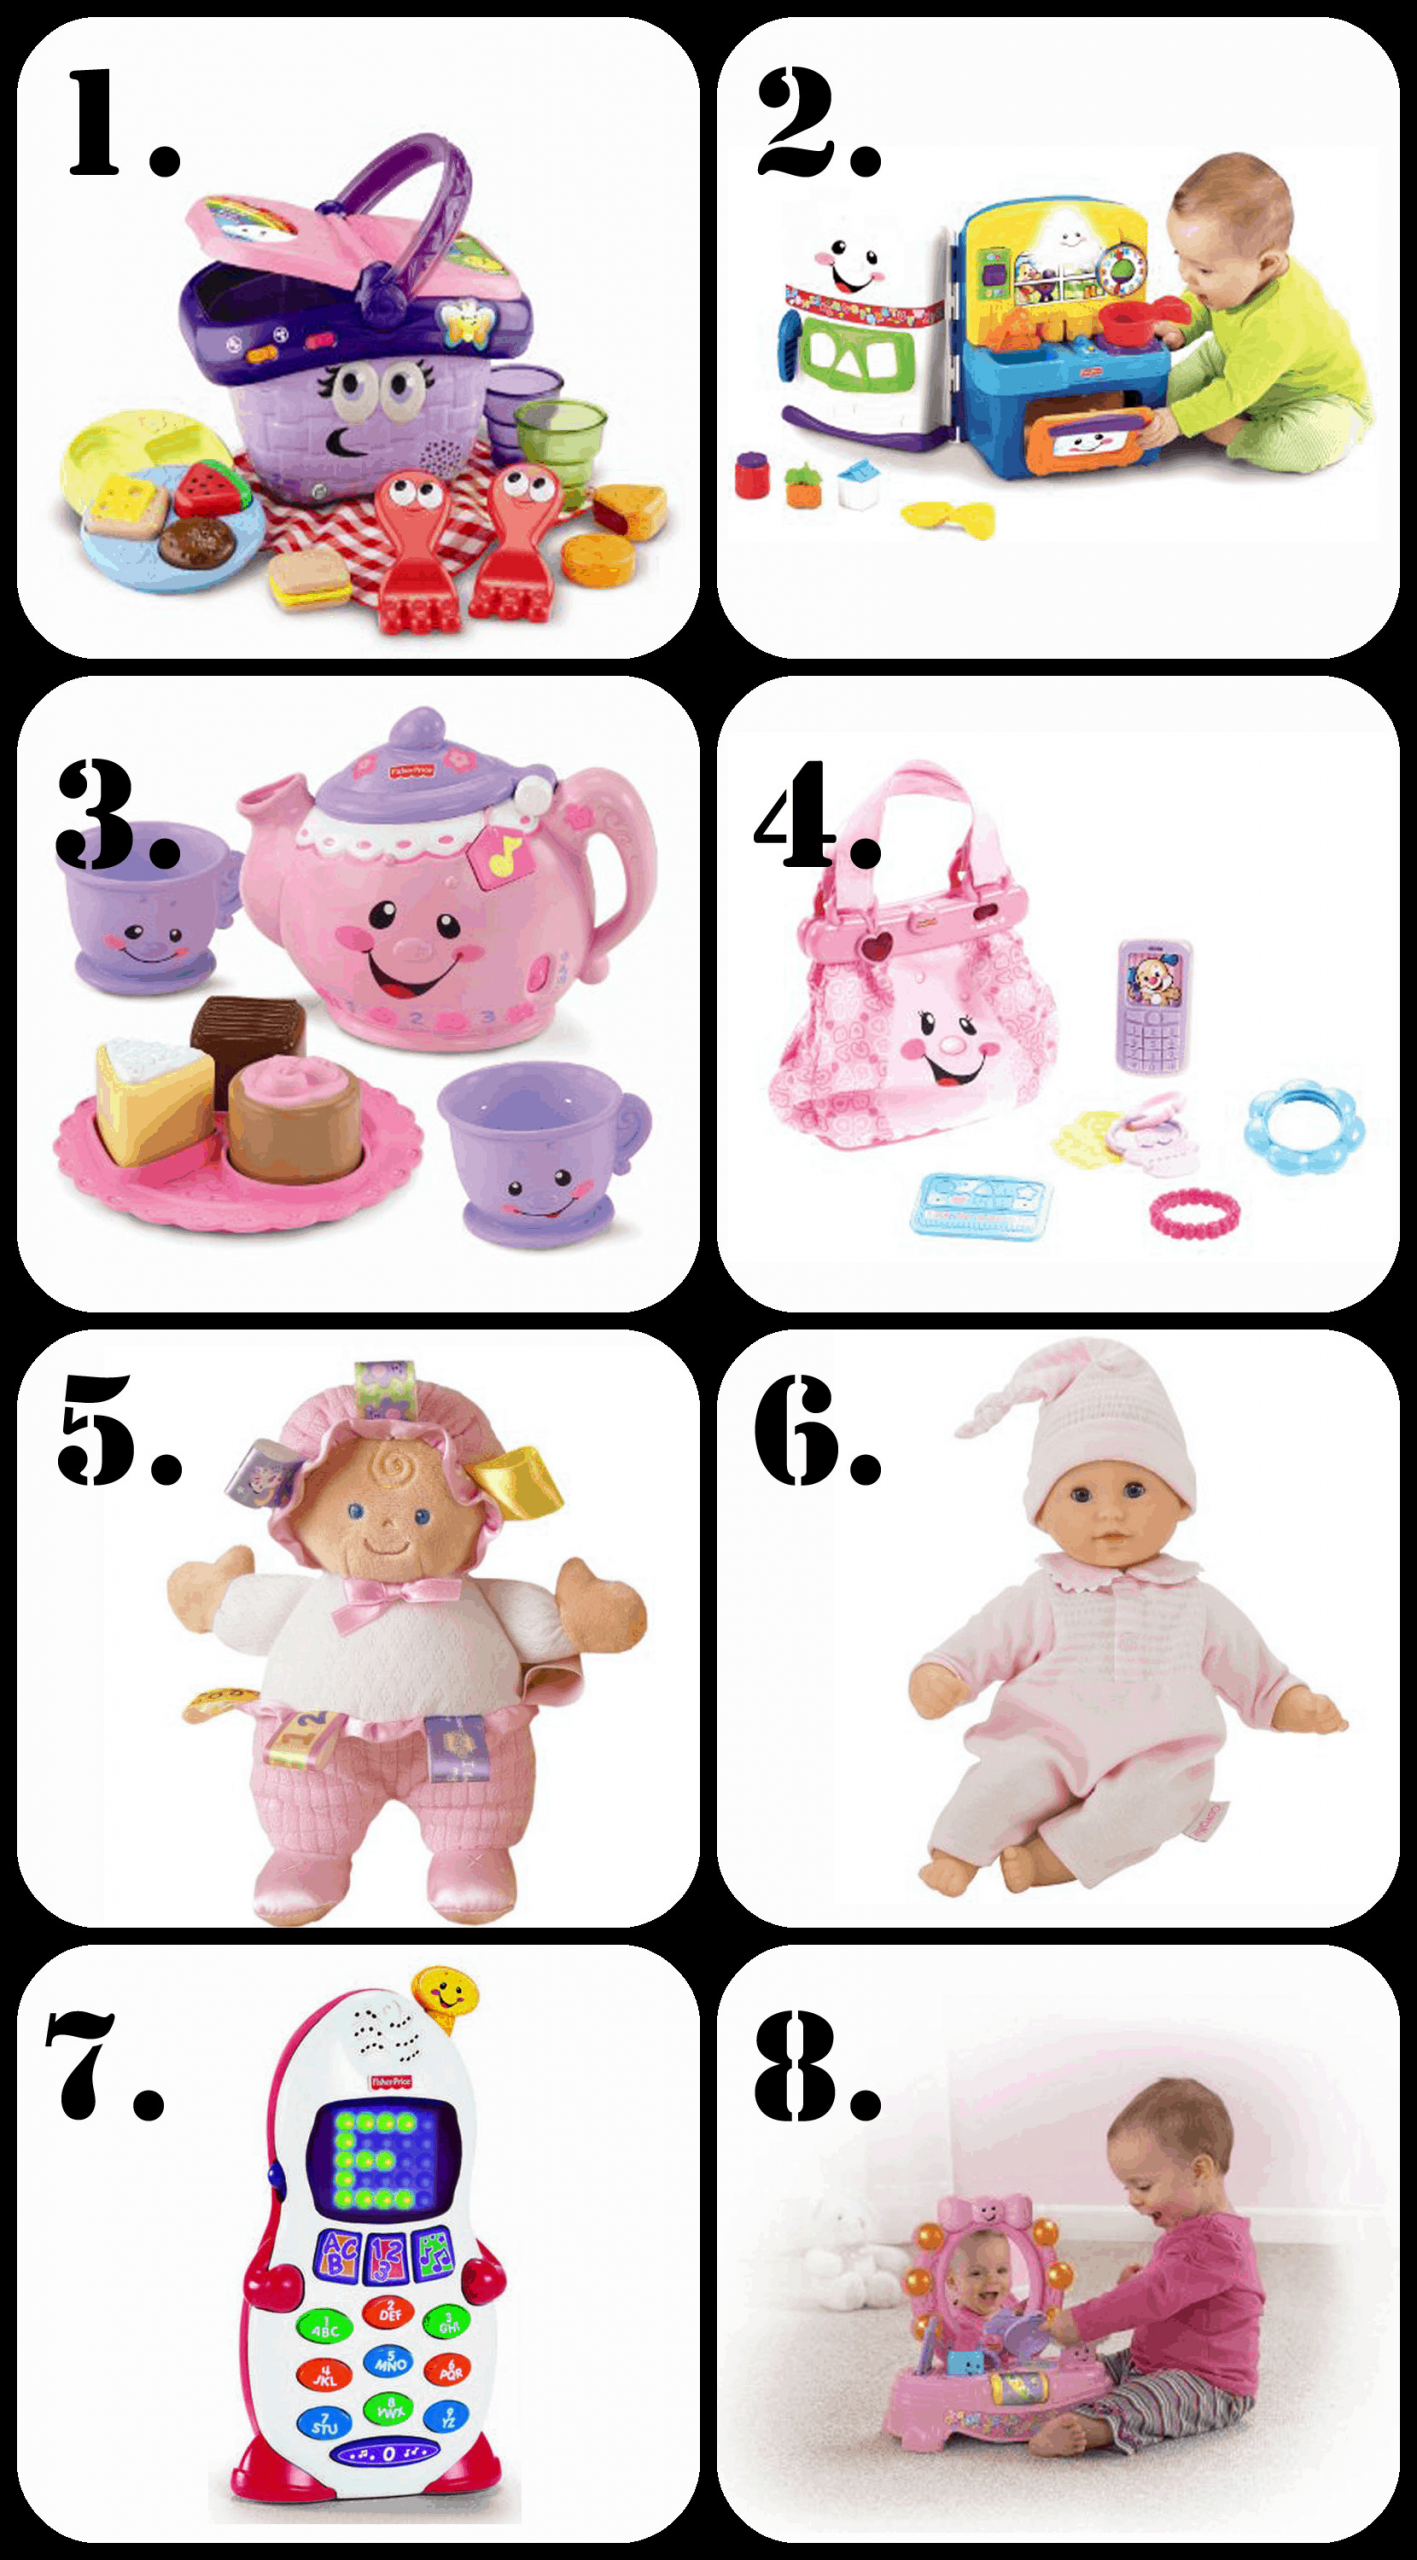 Gift Ideas For 1 Year Old Girls
 Gift Ideas For 1 Year Old Girl